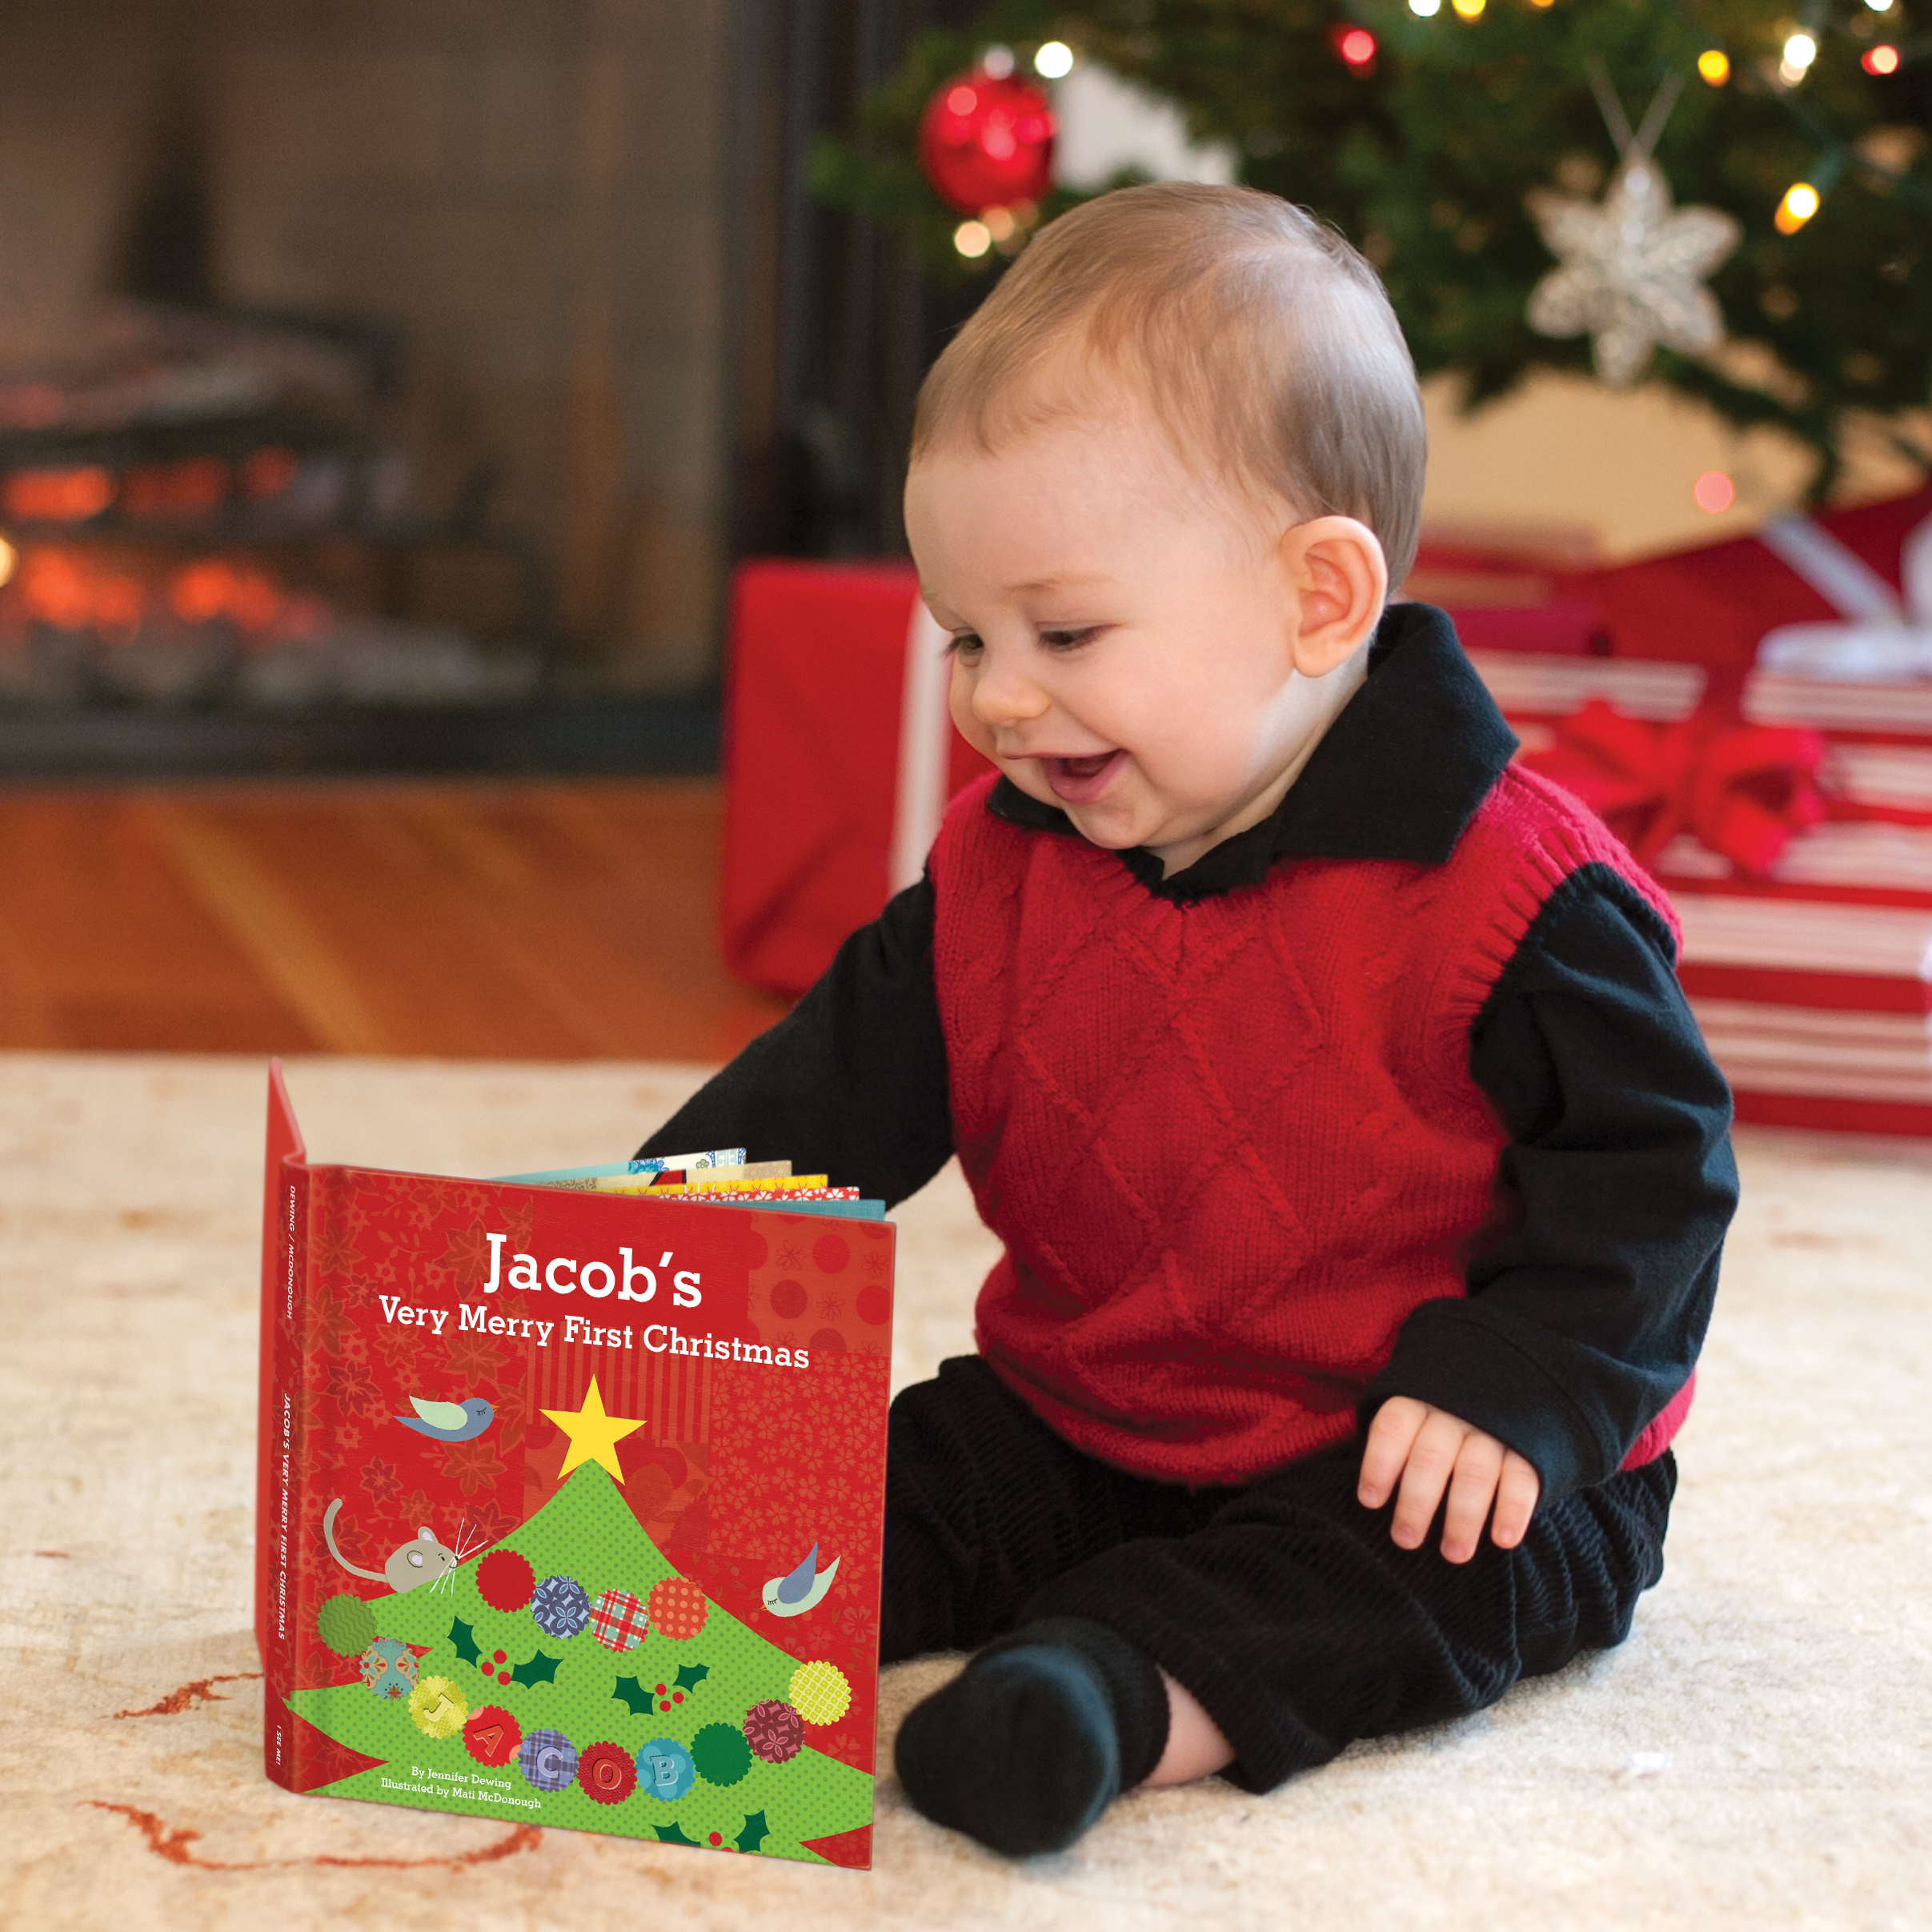 "My Very Merry Christmas" makes a charming personalized gift for baby's first Christmas!